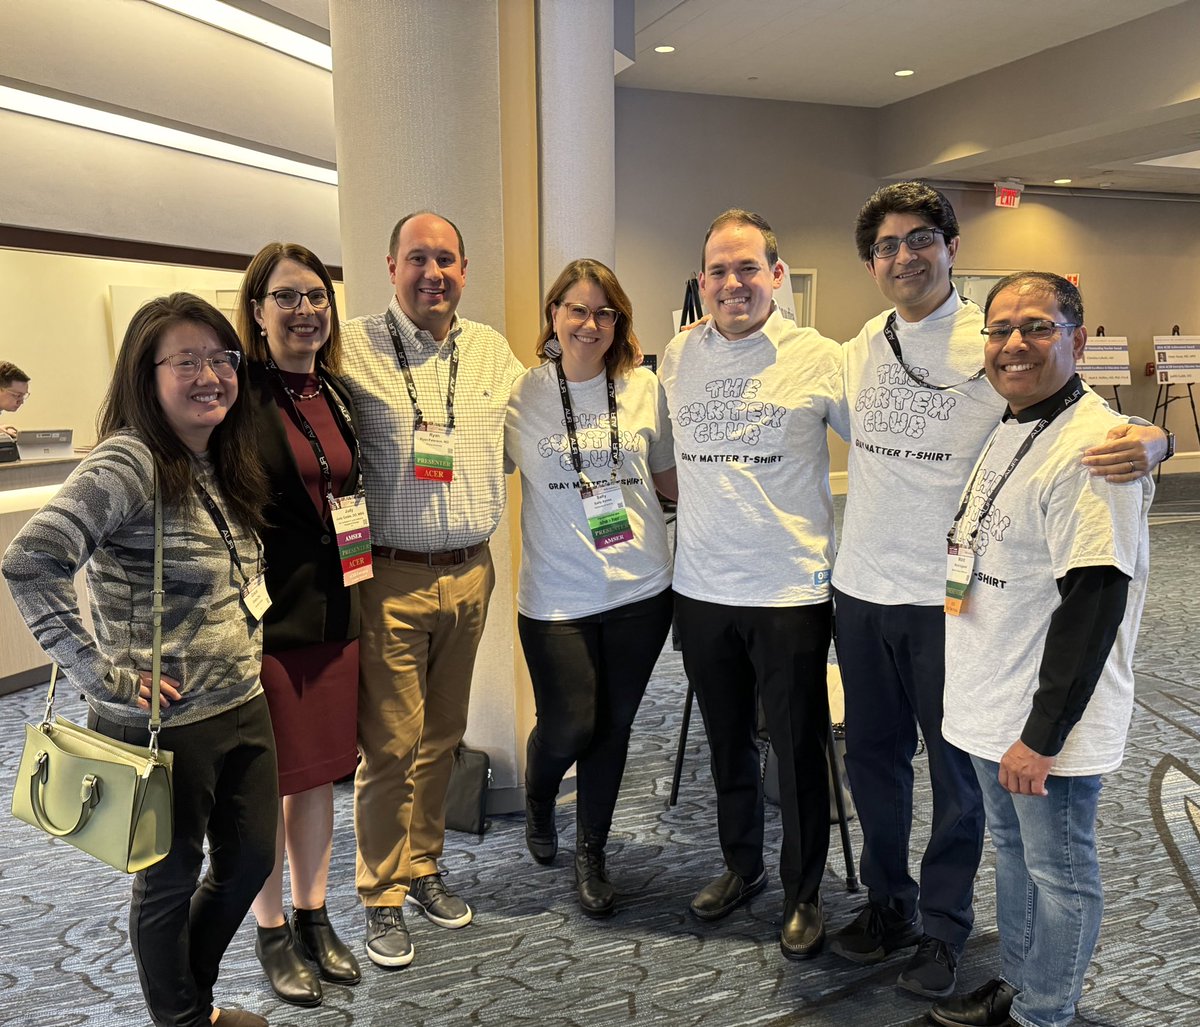 Thank you #AUR24 @AURtweet for this opportunity to meet up with old friends @RyanBPetersonMD @JudyGadde @totallyskates @MarcusKonner and to make new wonderful connections!! Welcome to the club @Mahan_Mathur and @SalAyesa !! @thecortexclub